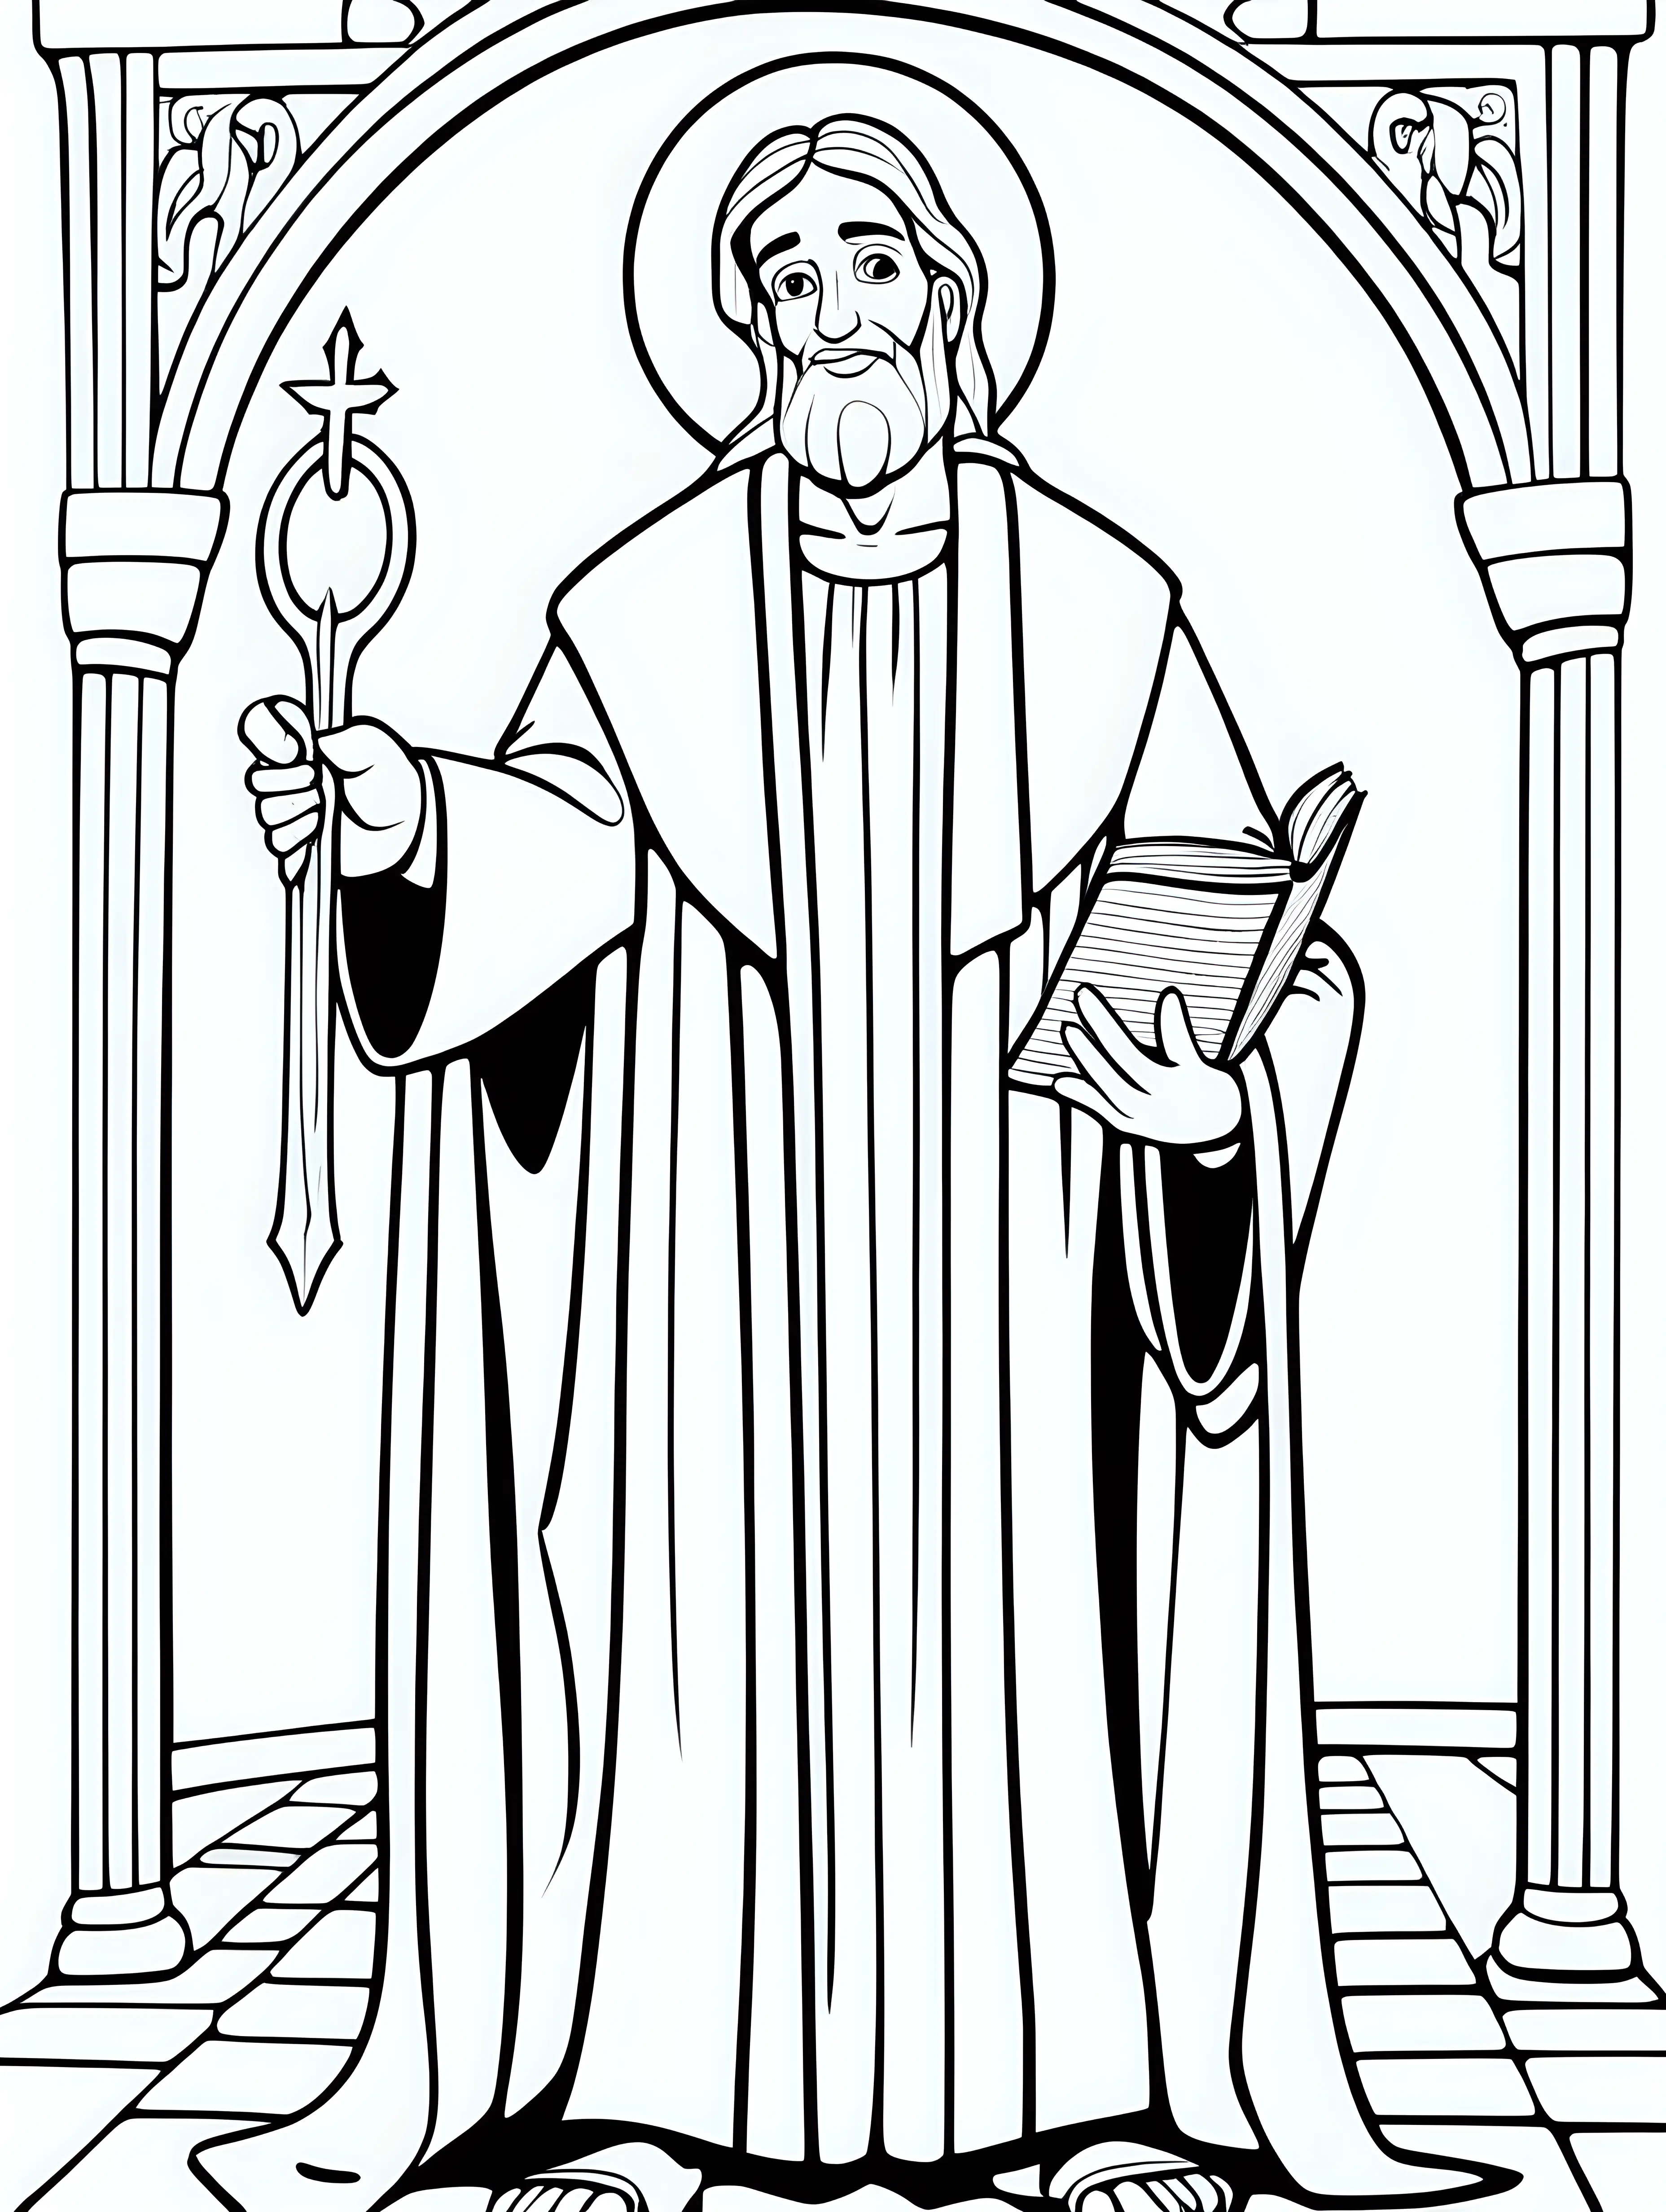 A Christian religion bible character coloring page, cartoon style, thin lines, few details, no background, no shadows, no greys